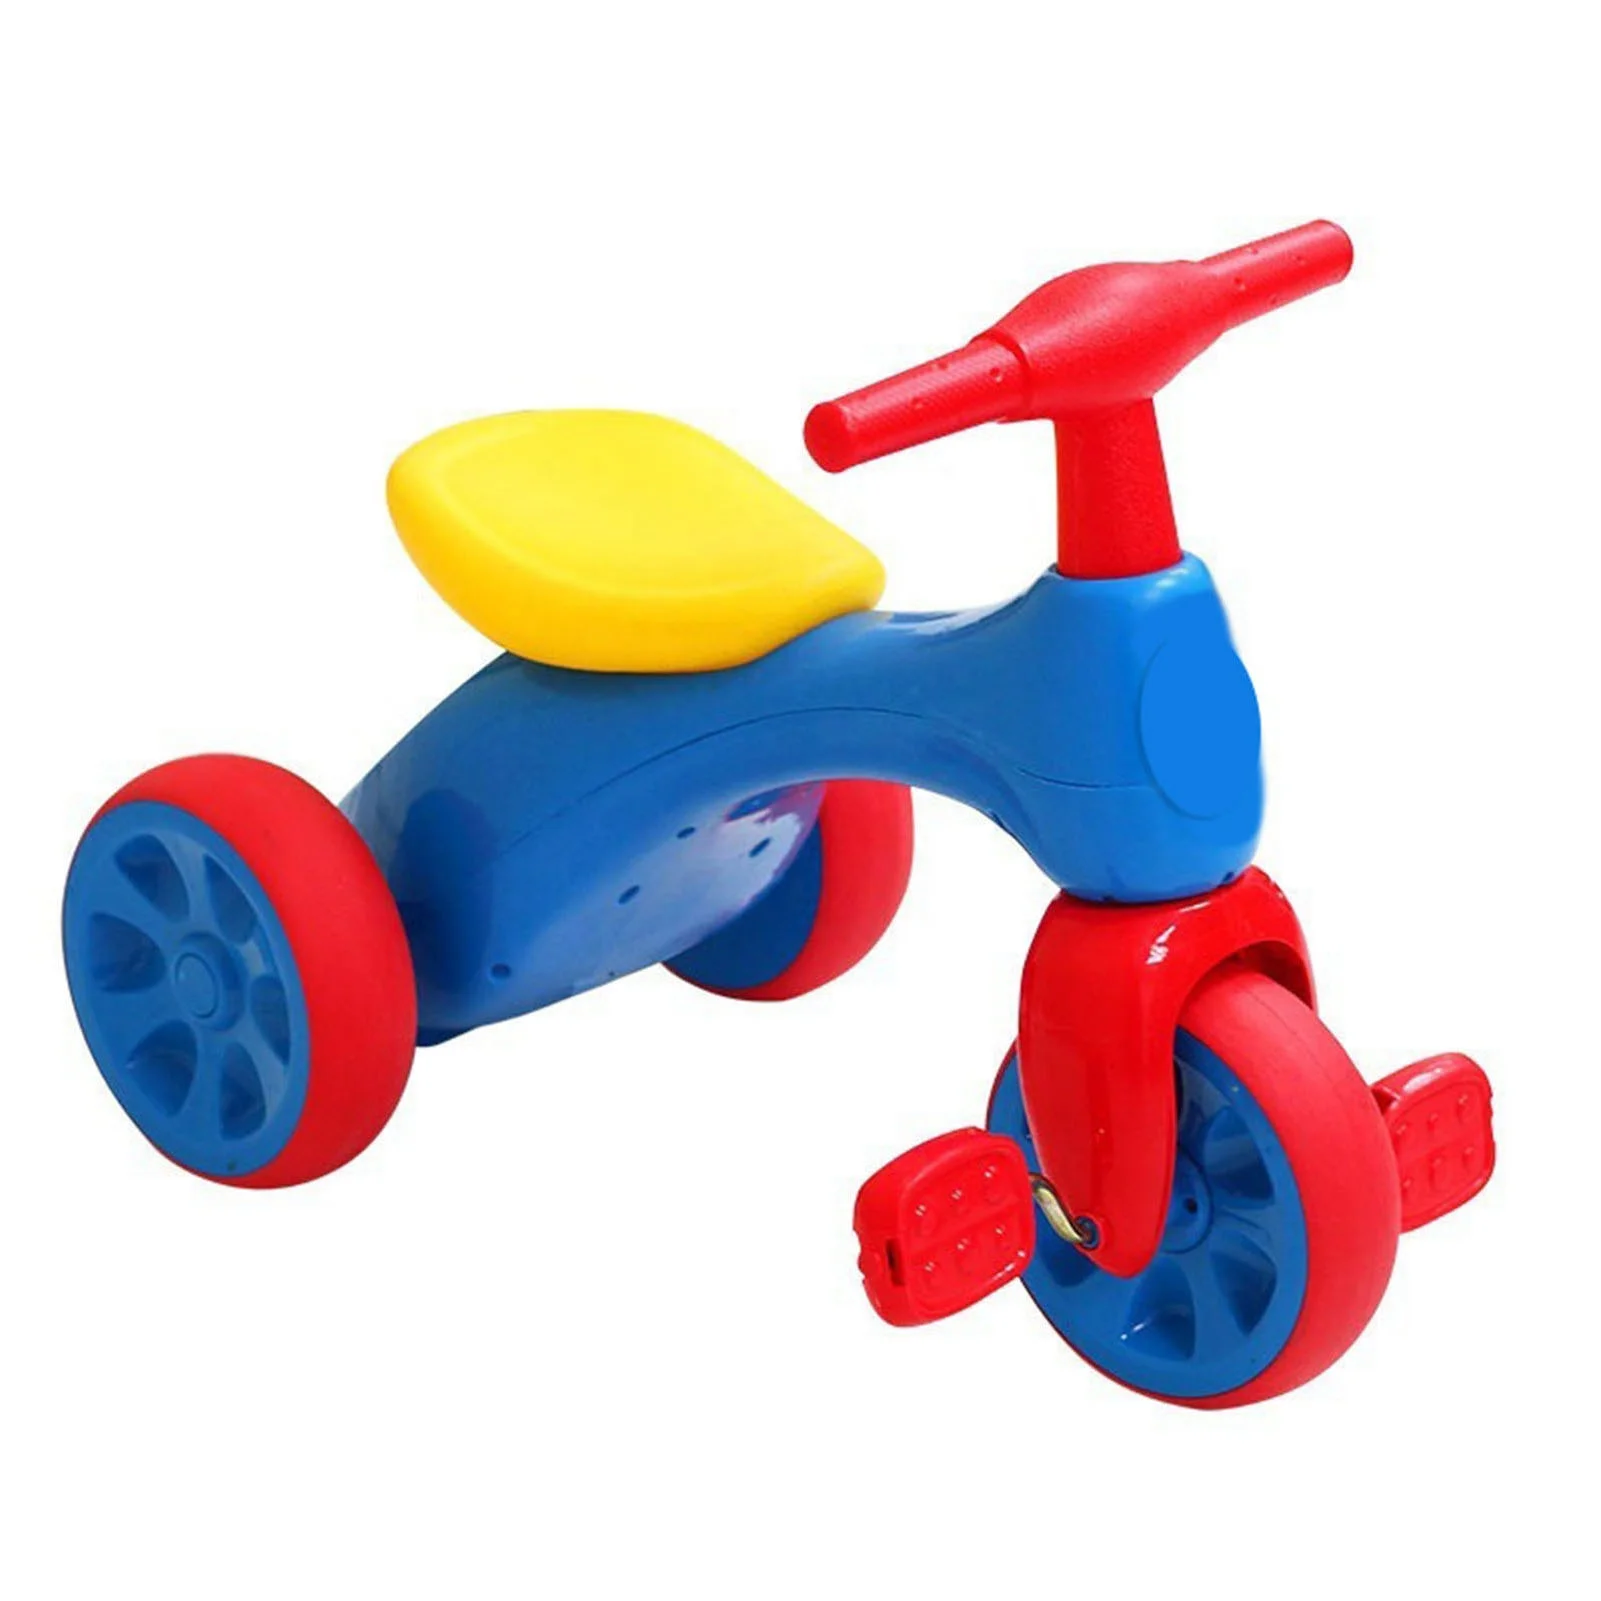 

Baby Balance Bike Learn To Walk Get Balance Sense No Foot Pedal Riding Toys For Kids Baby Toddler 1-3 Years Child Tricycle Bikes, Picture